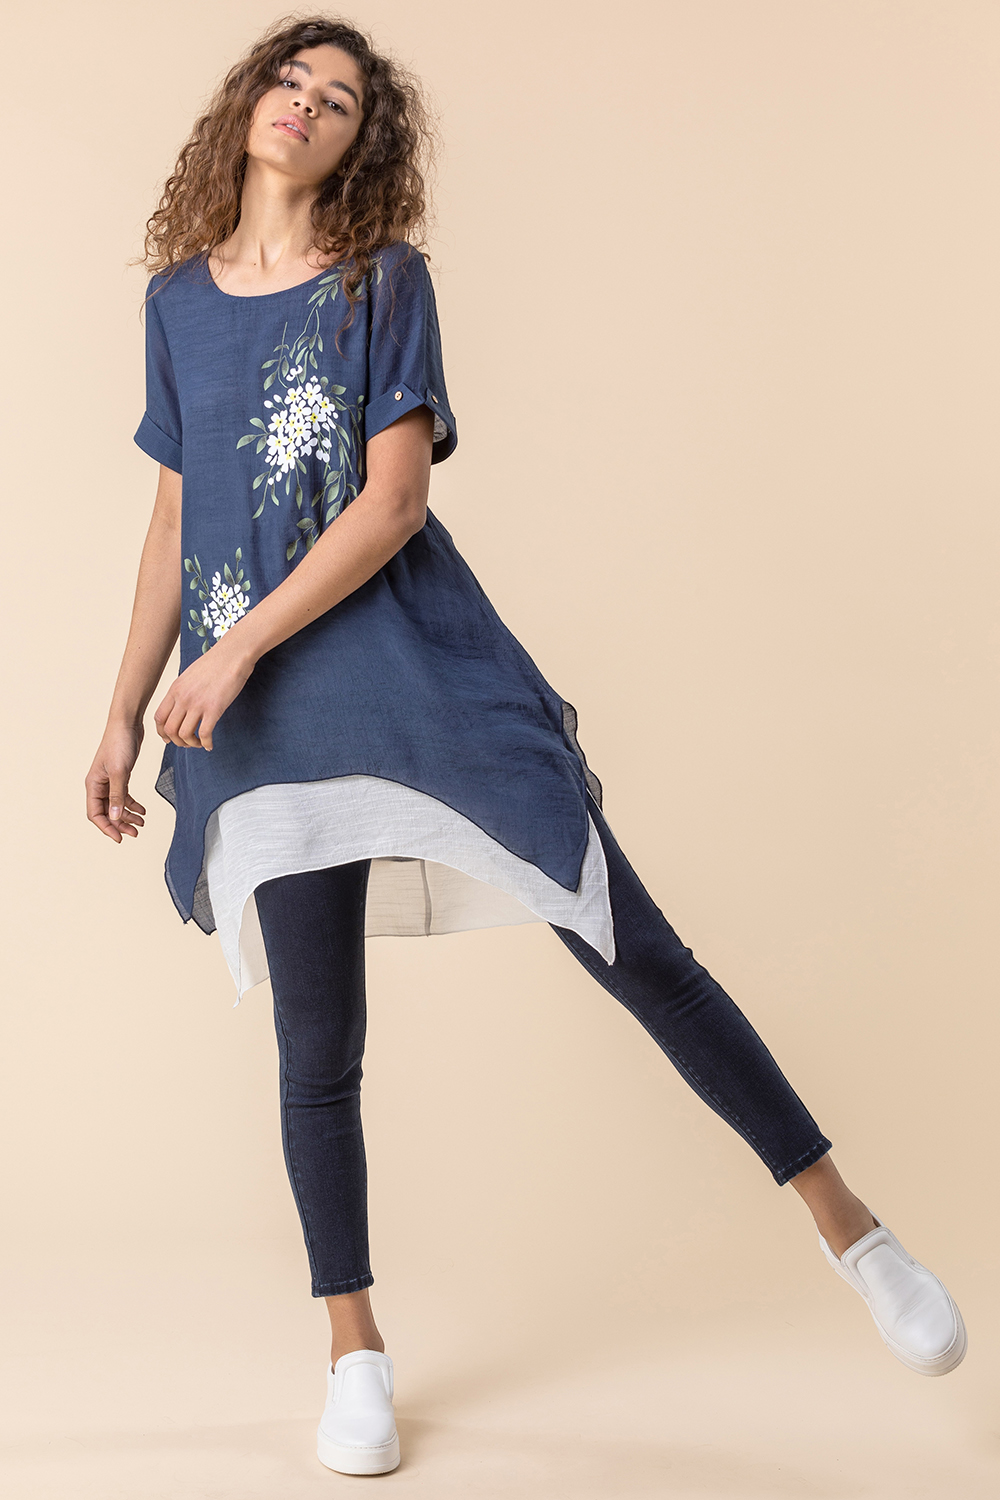 Navy  Floral Print Asymmetric Tunic Top, Image 3 of 4